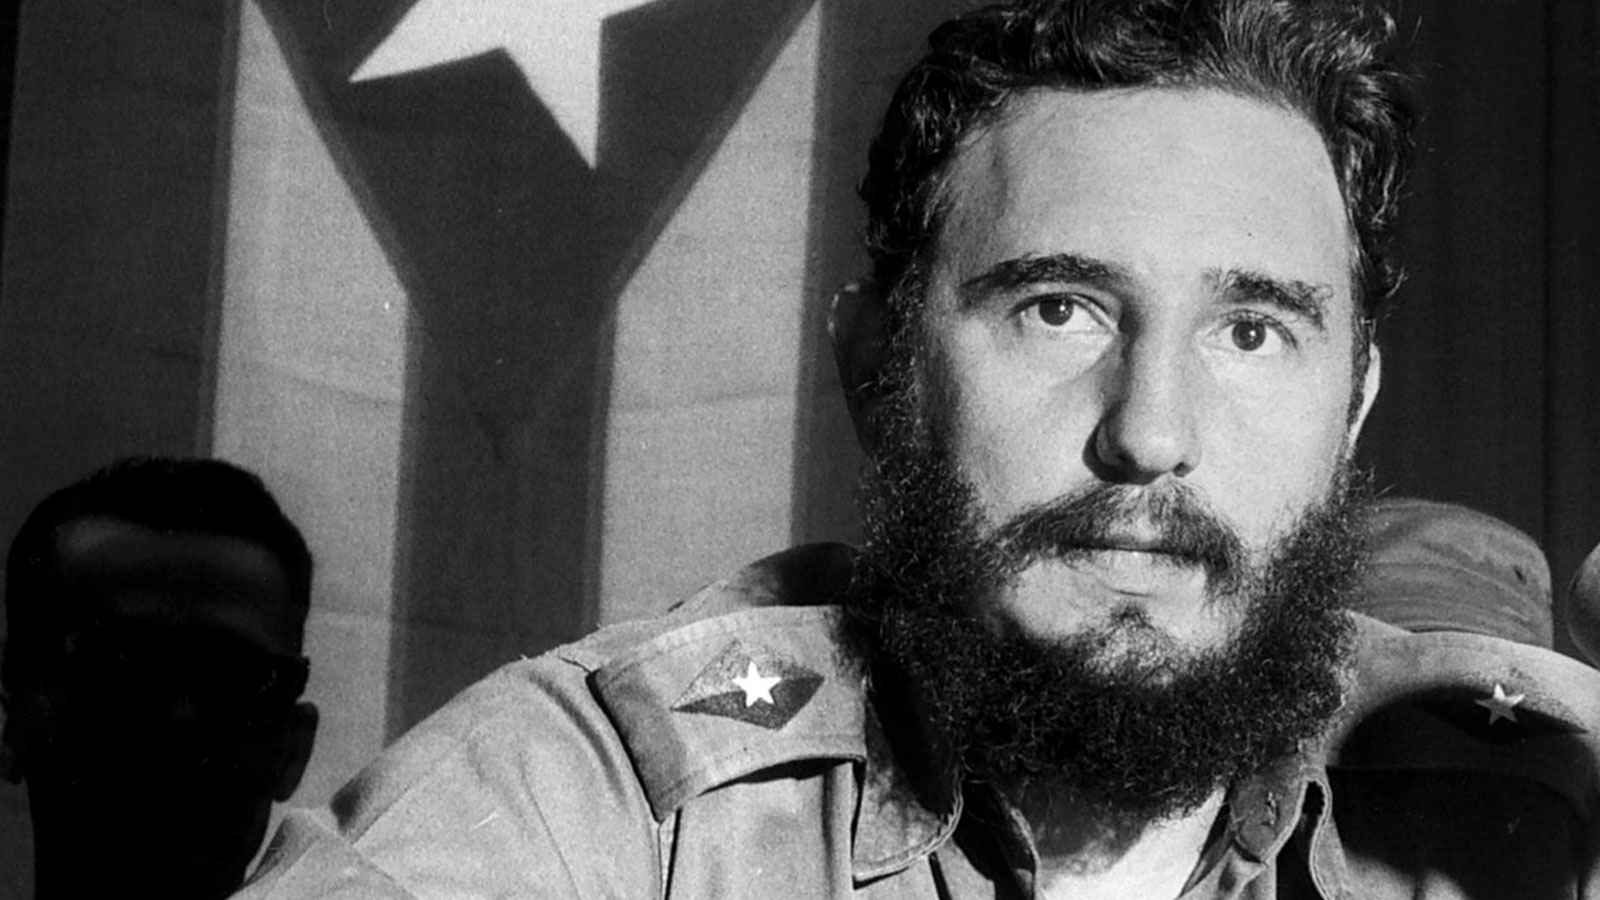 Five years after Fidel